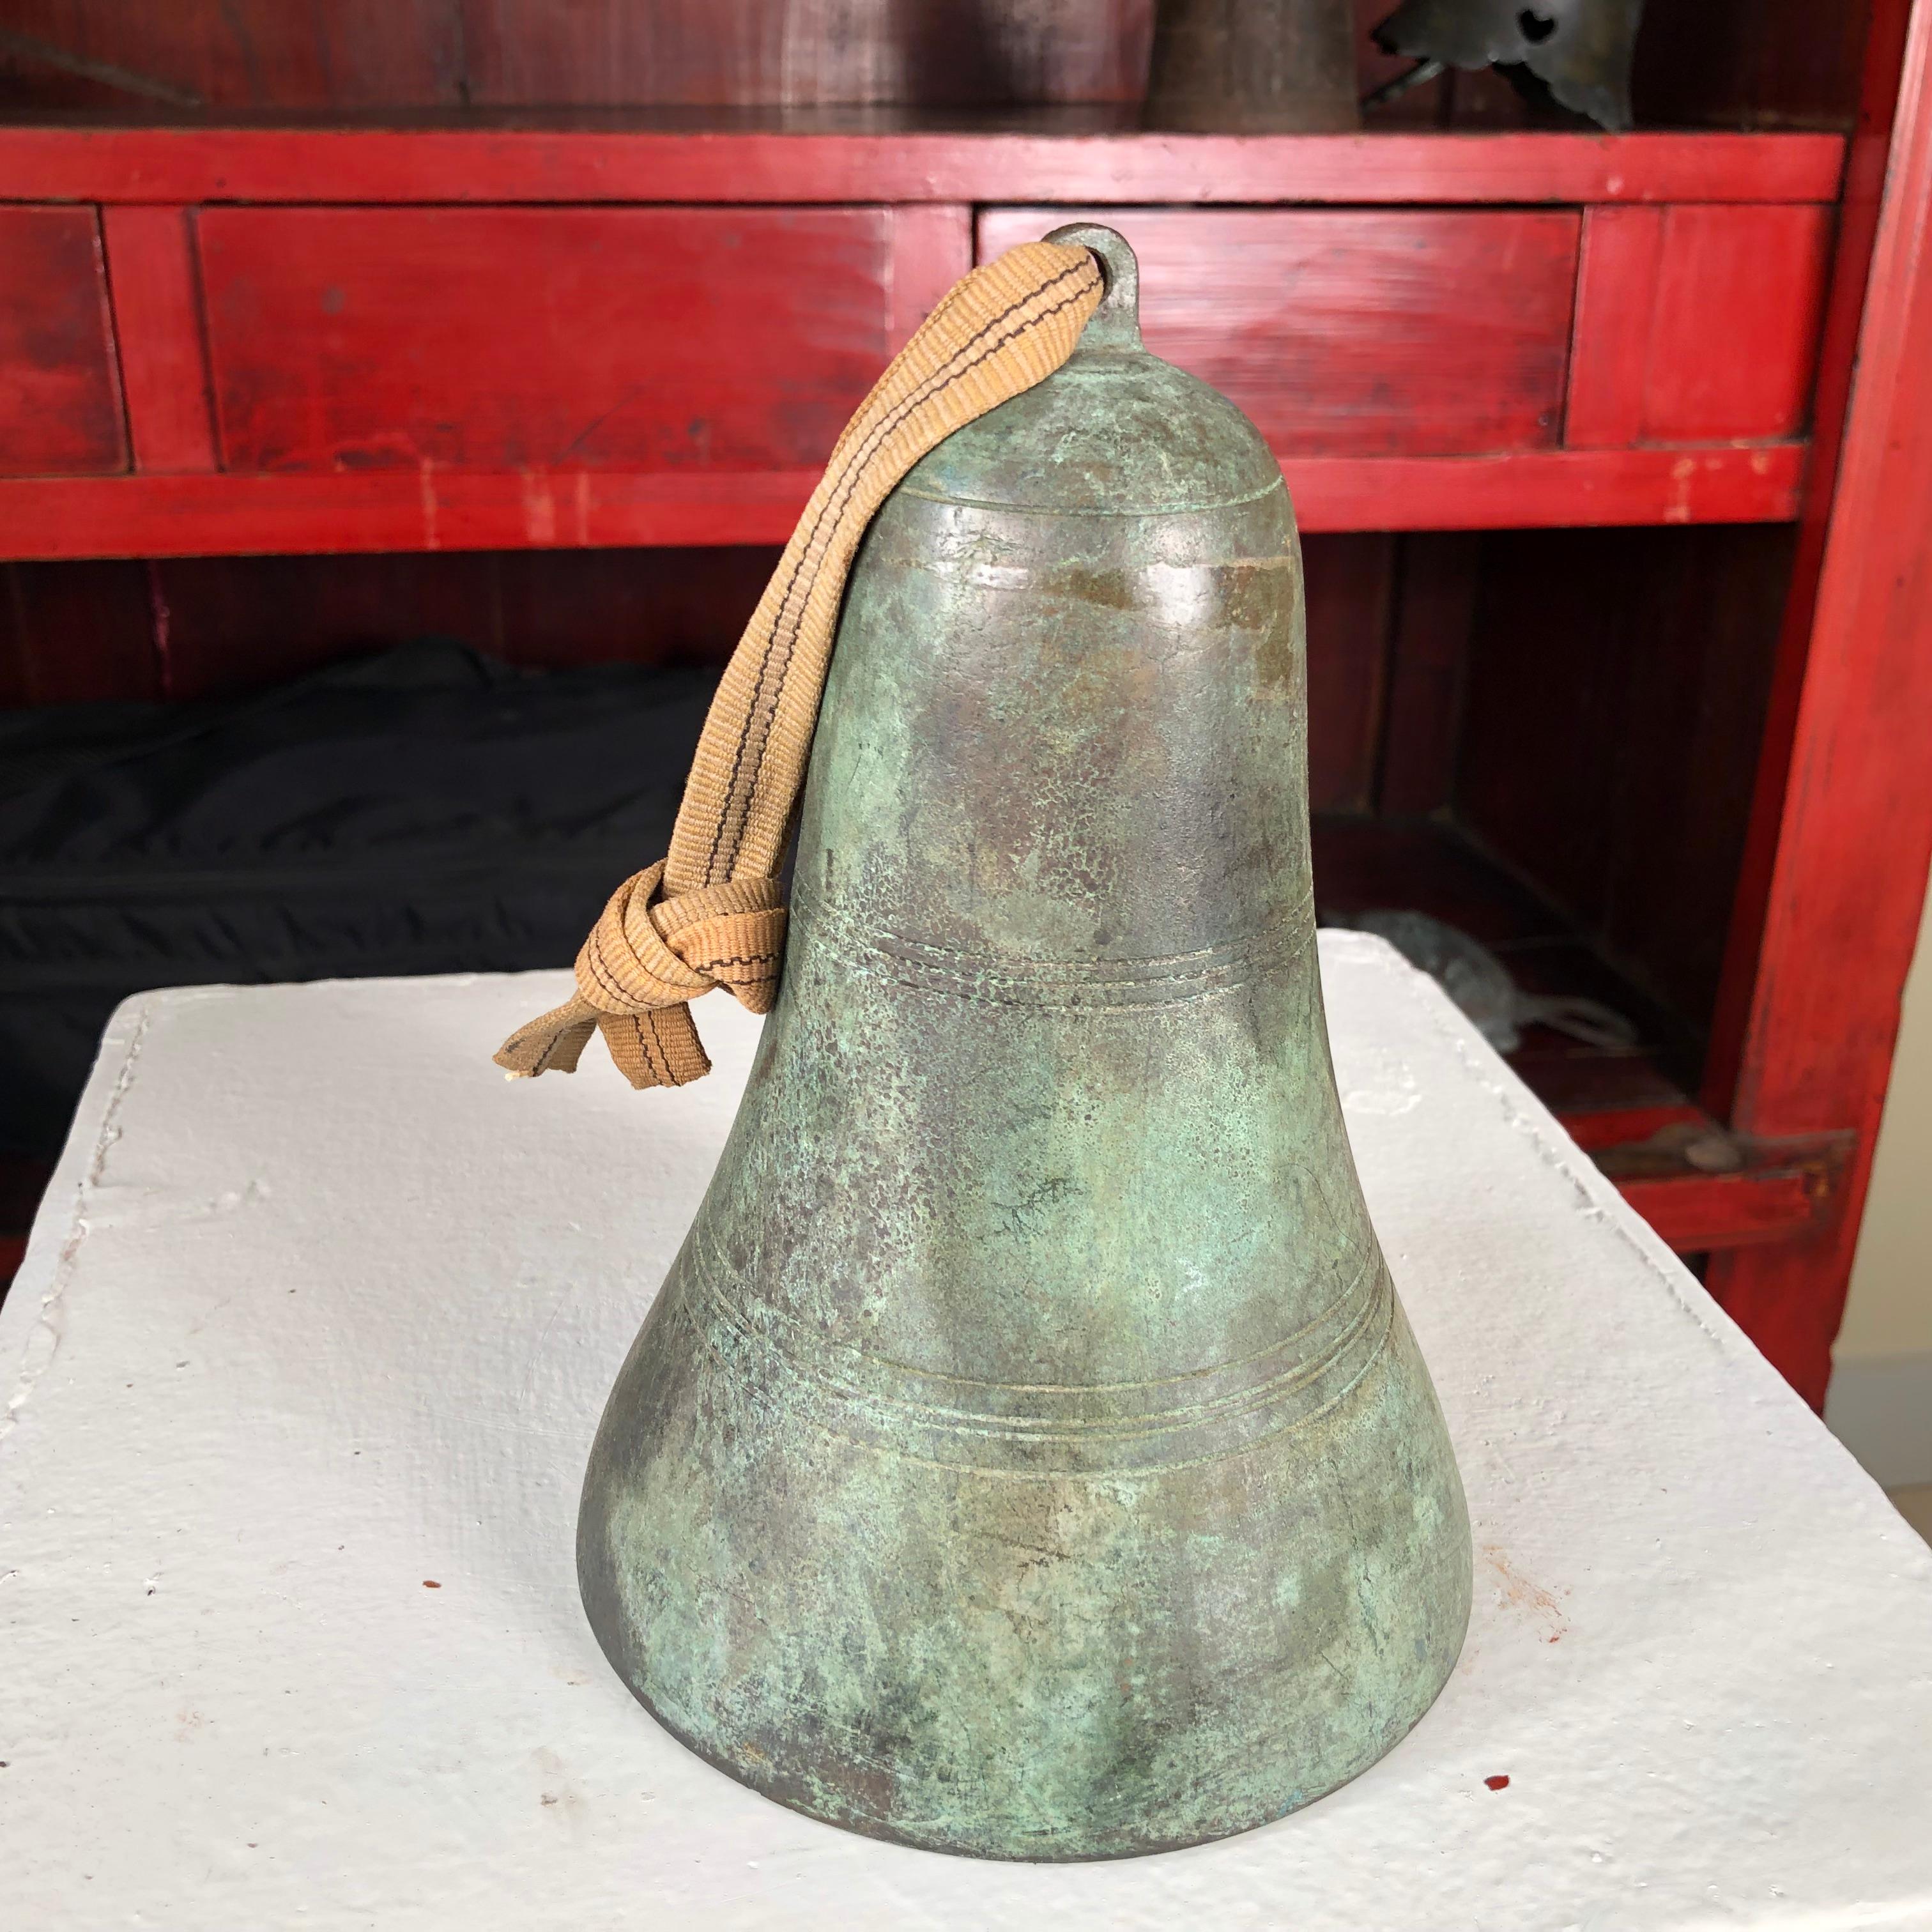 Fresh find from our recent Japanese Acquisitions Travels

Here's a rare treasure from Japan and an unusual find- an excellent candidate to accent your indoor or outdoor garden space. 

This is a superb antique bronze casting of a wonderful